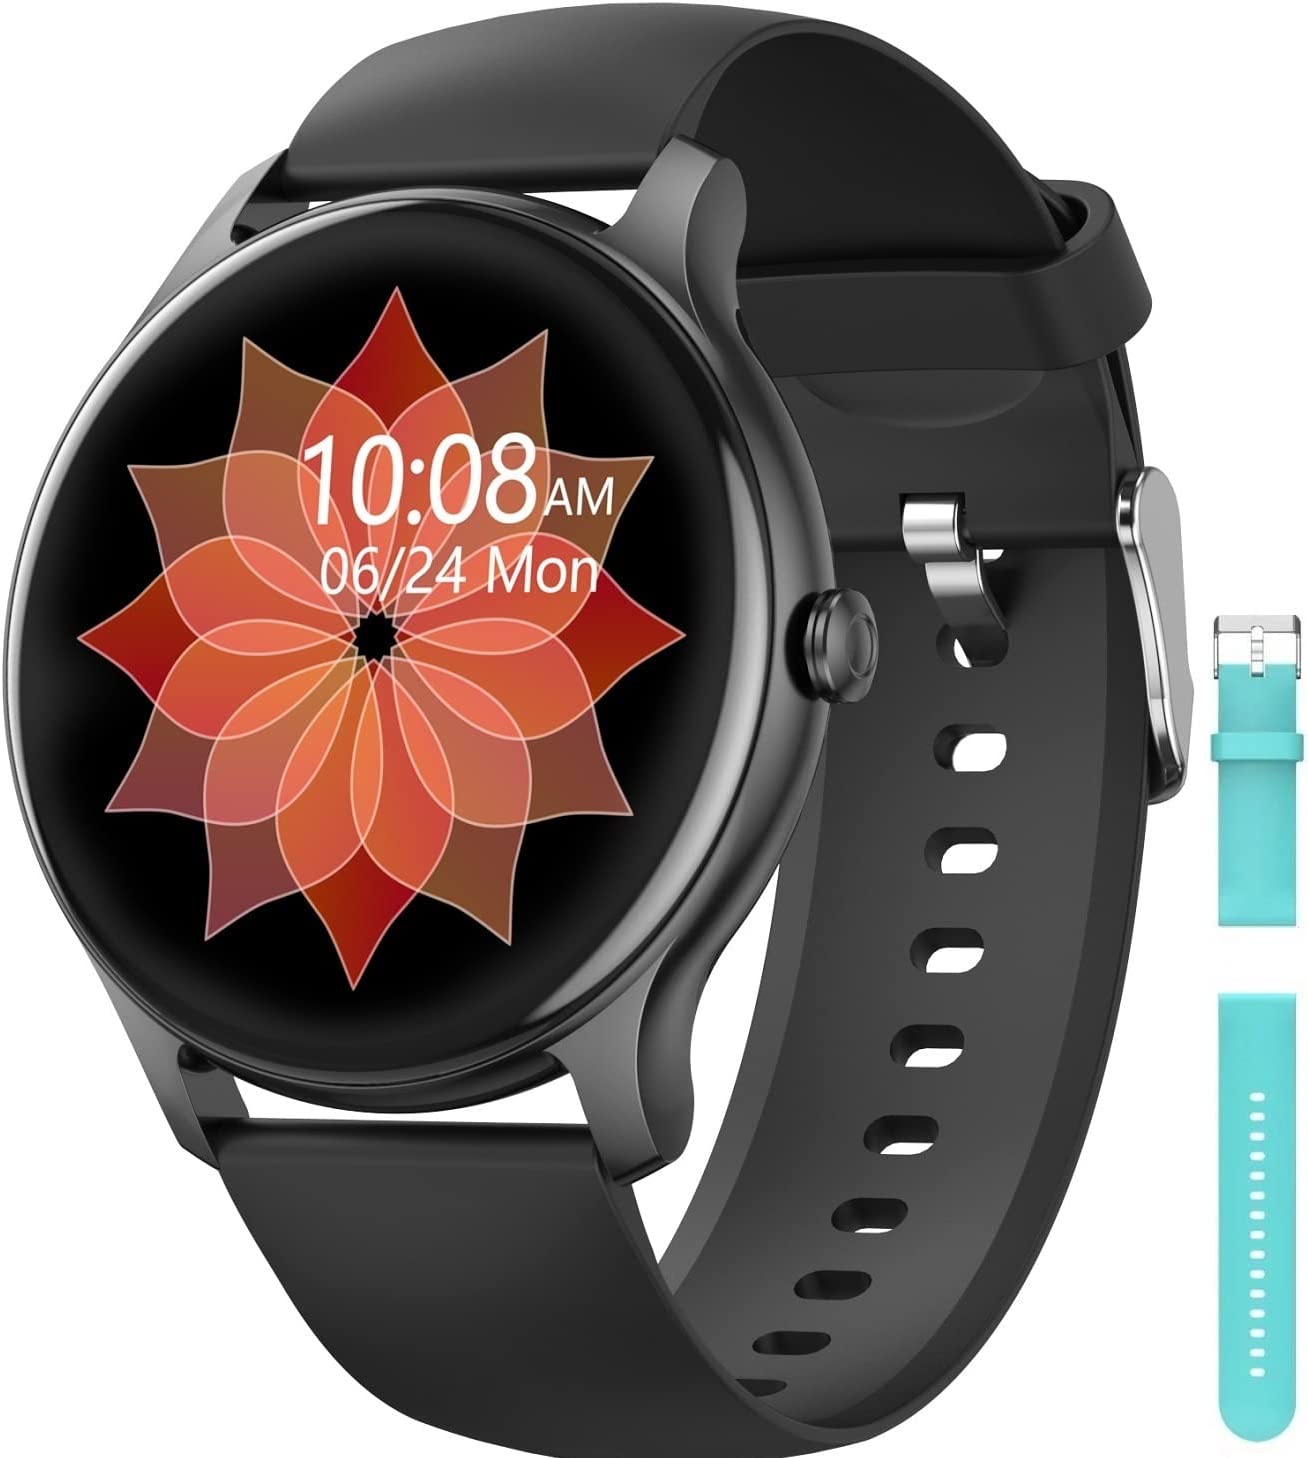 smart watch with heart rate monitor